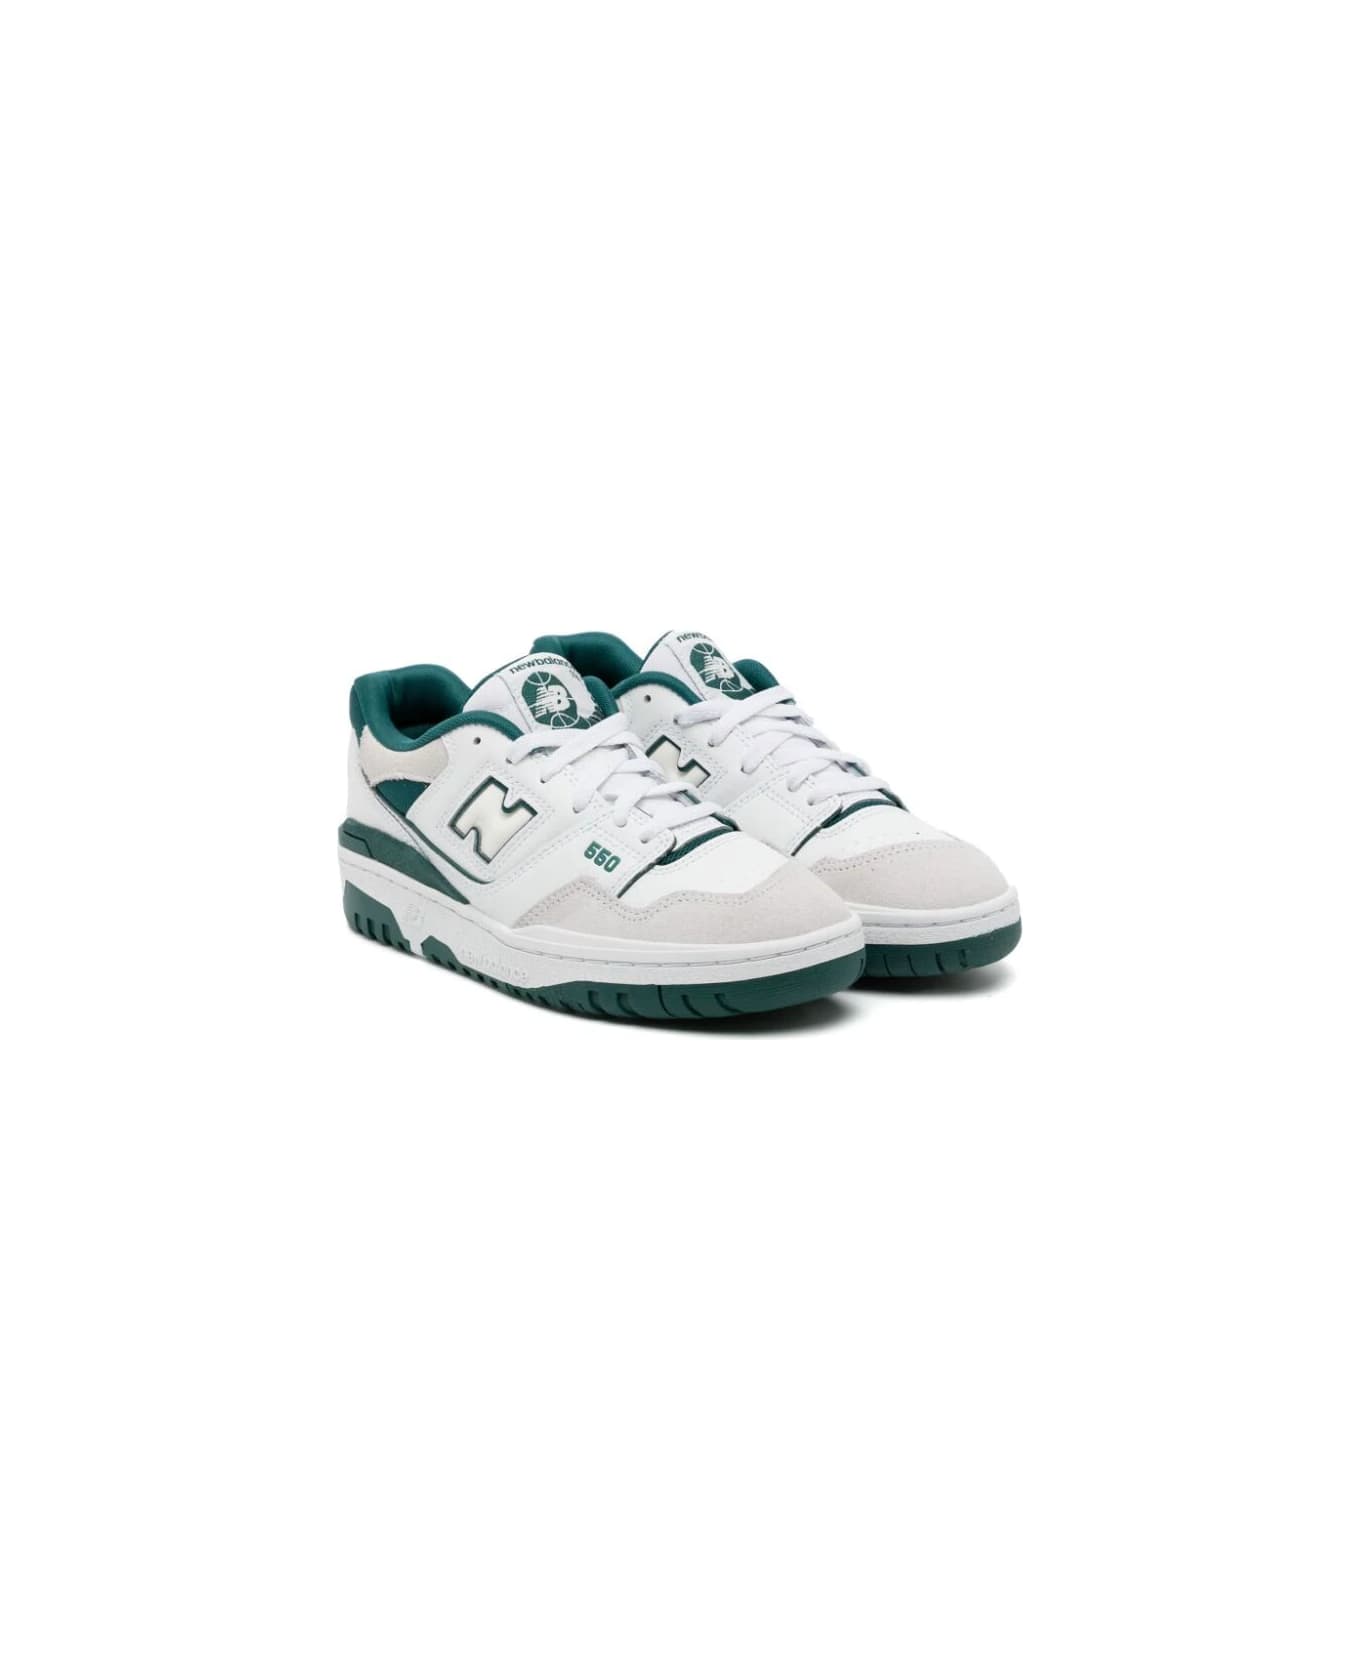 New Balance 550 Sneakers - White Green